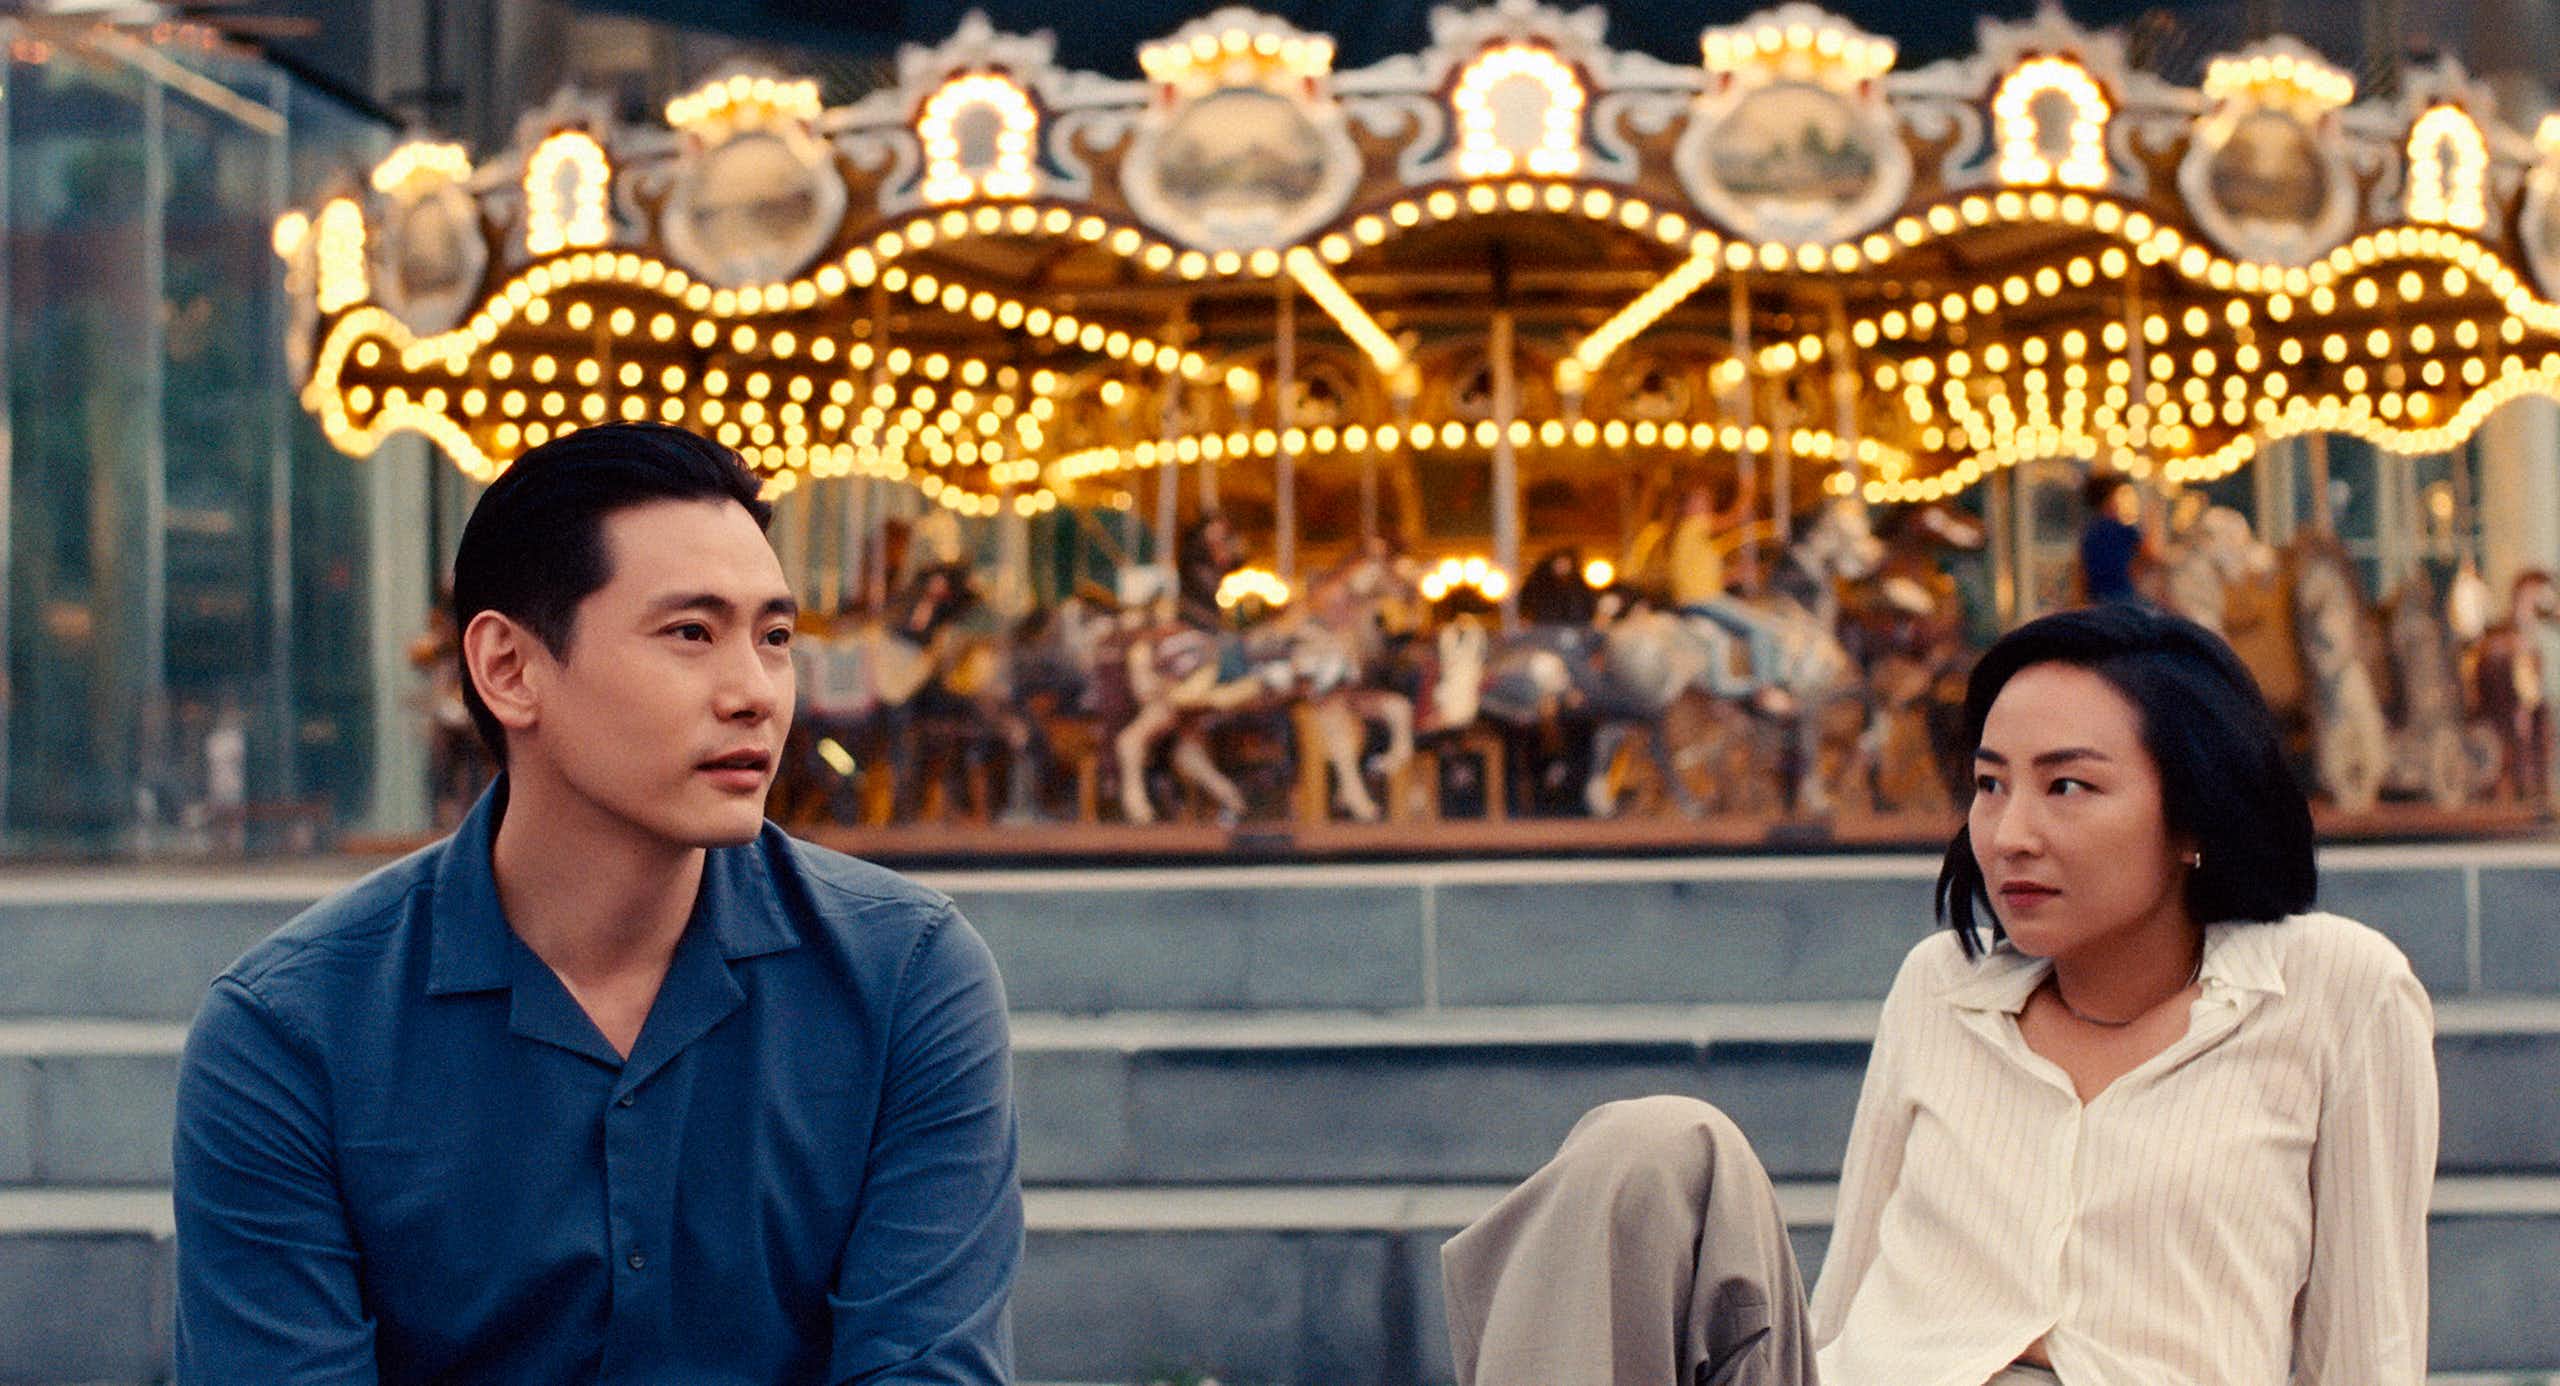 An Asian man and woman sit in front of a merry-go-round